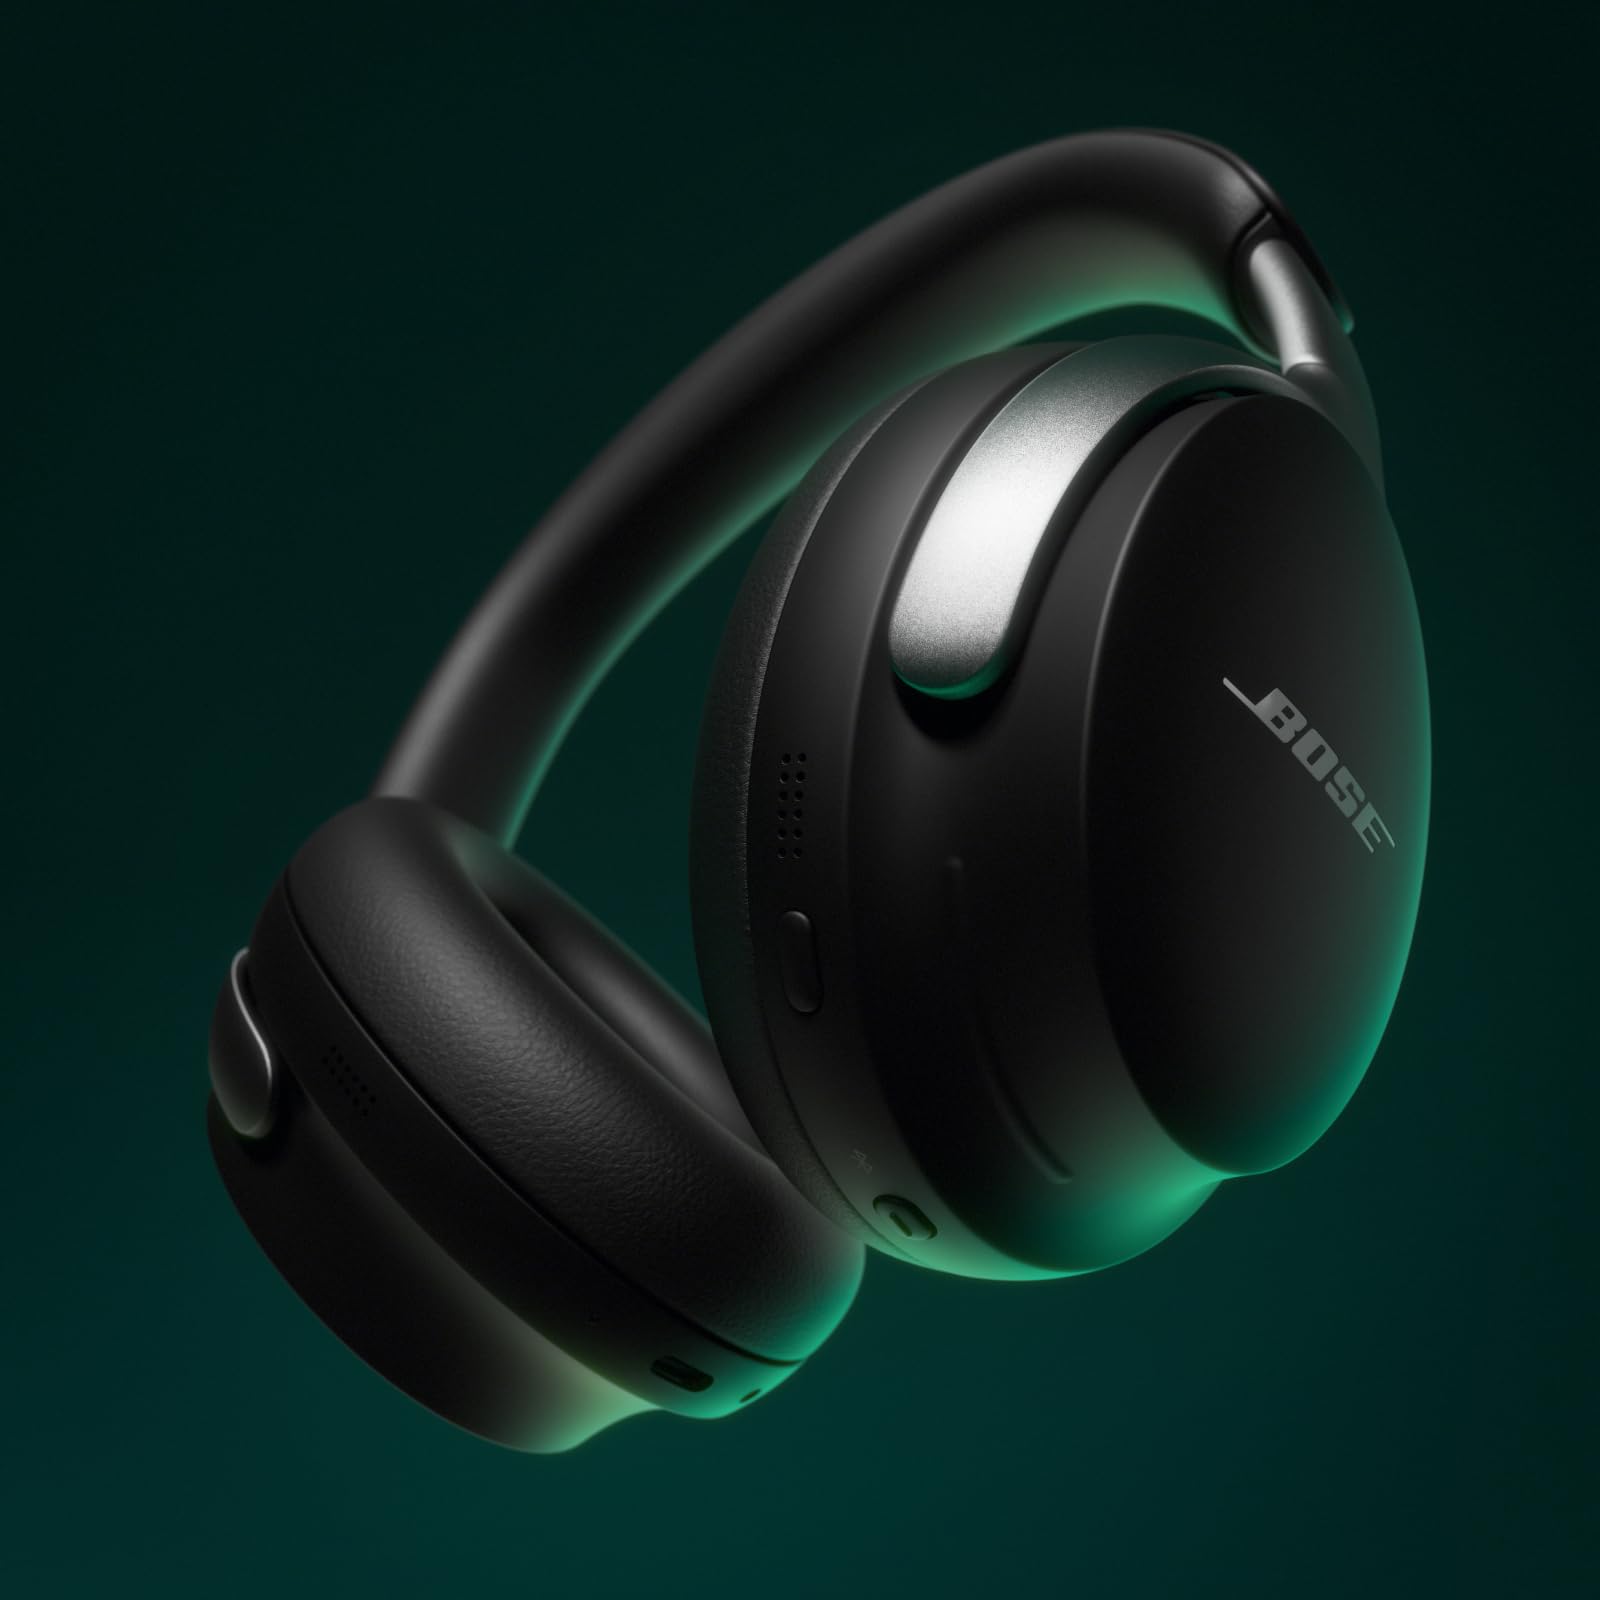 New Bose QuietComfort Ultra Wireless Noise Cancelling Headphones with Spatial Audio, Over-the-Ear Headphones with Mic, Up to 24 Hours of Battery Life, Black